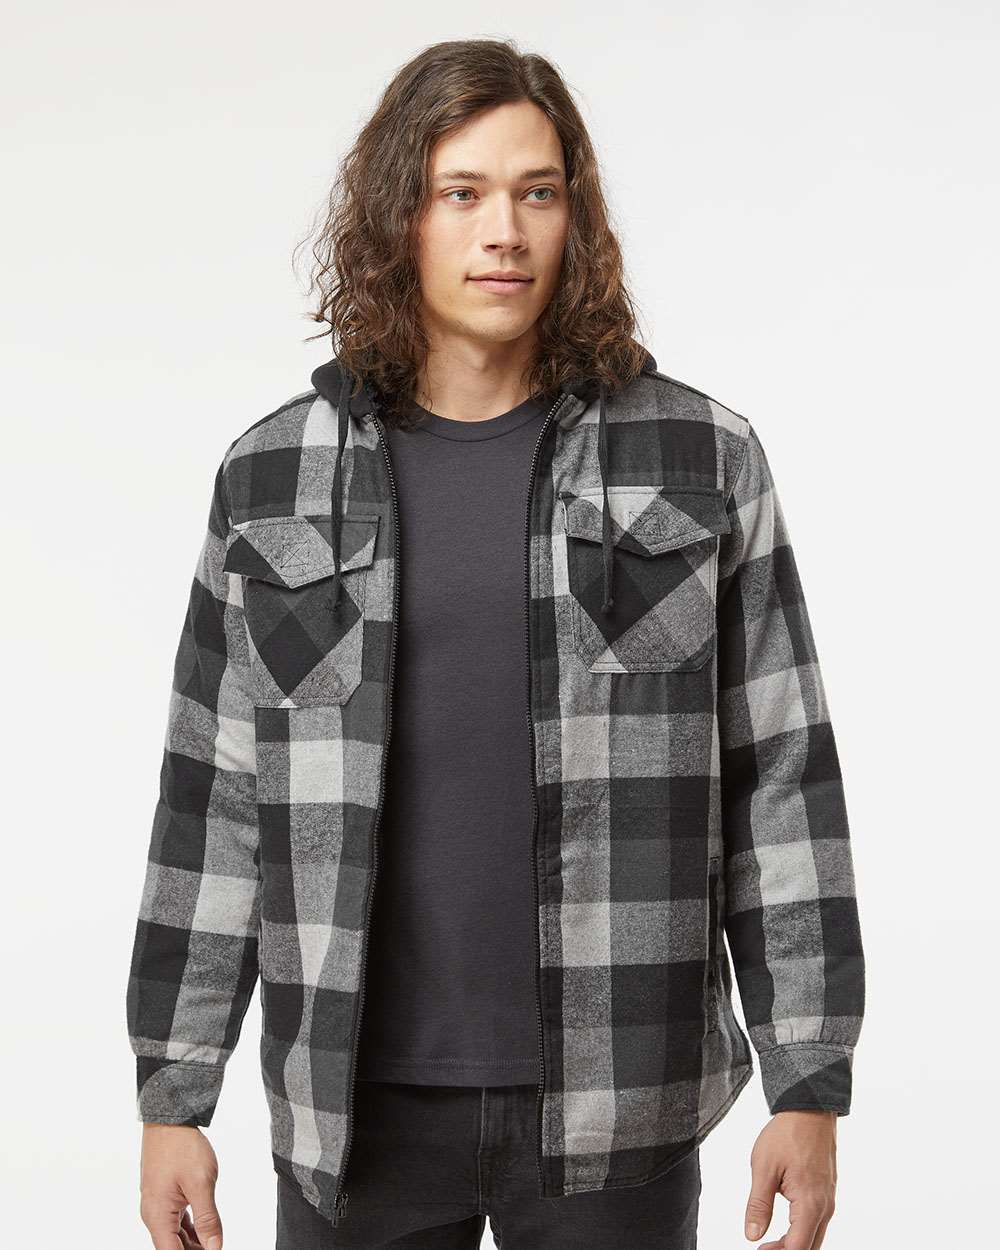 Burnside Mens 8620 Plaid Quilted Lined Flannel Full-Zip Hooded Jacket 